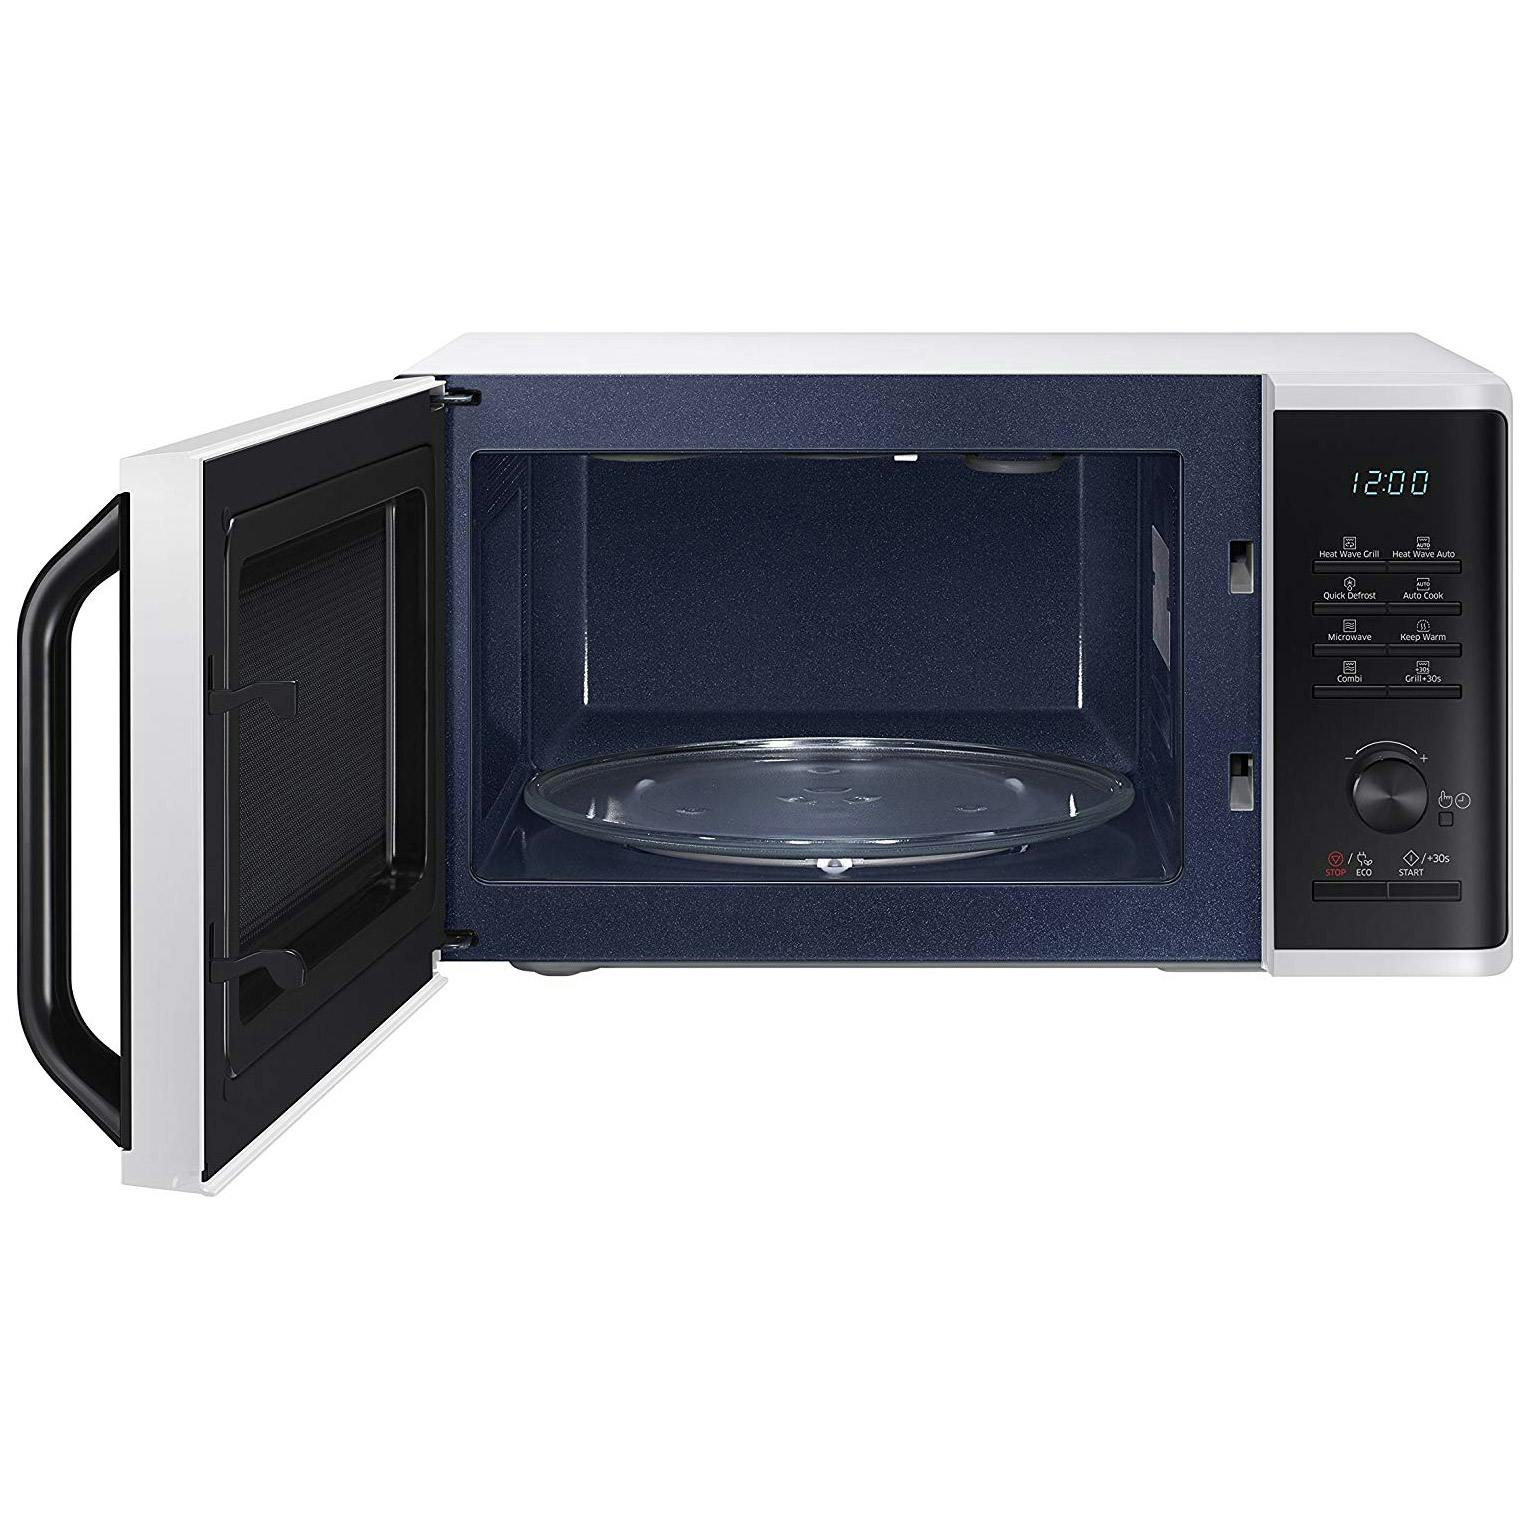 Samsung MG23K3575AW Compact Microwave Oven with Grill in